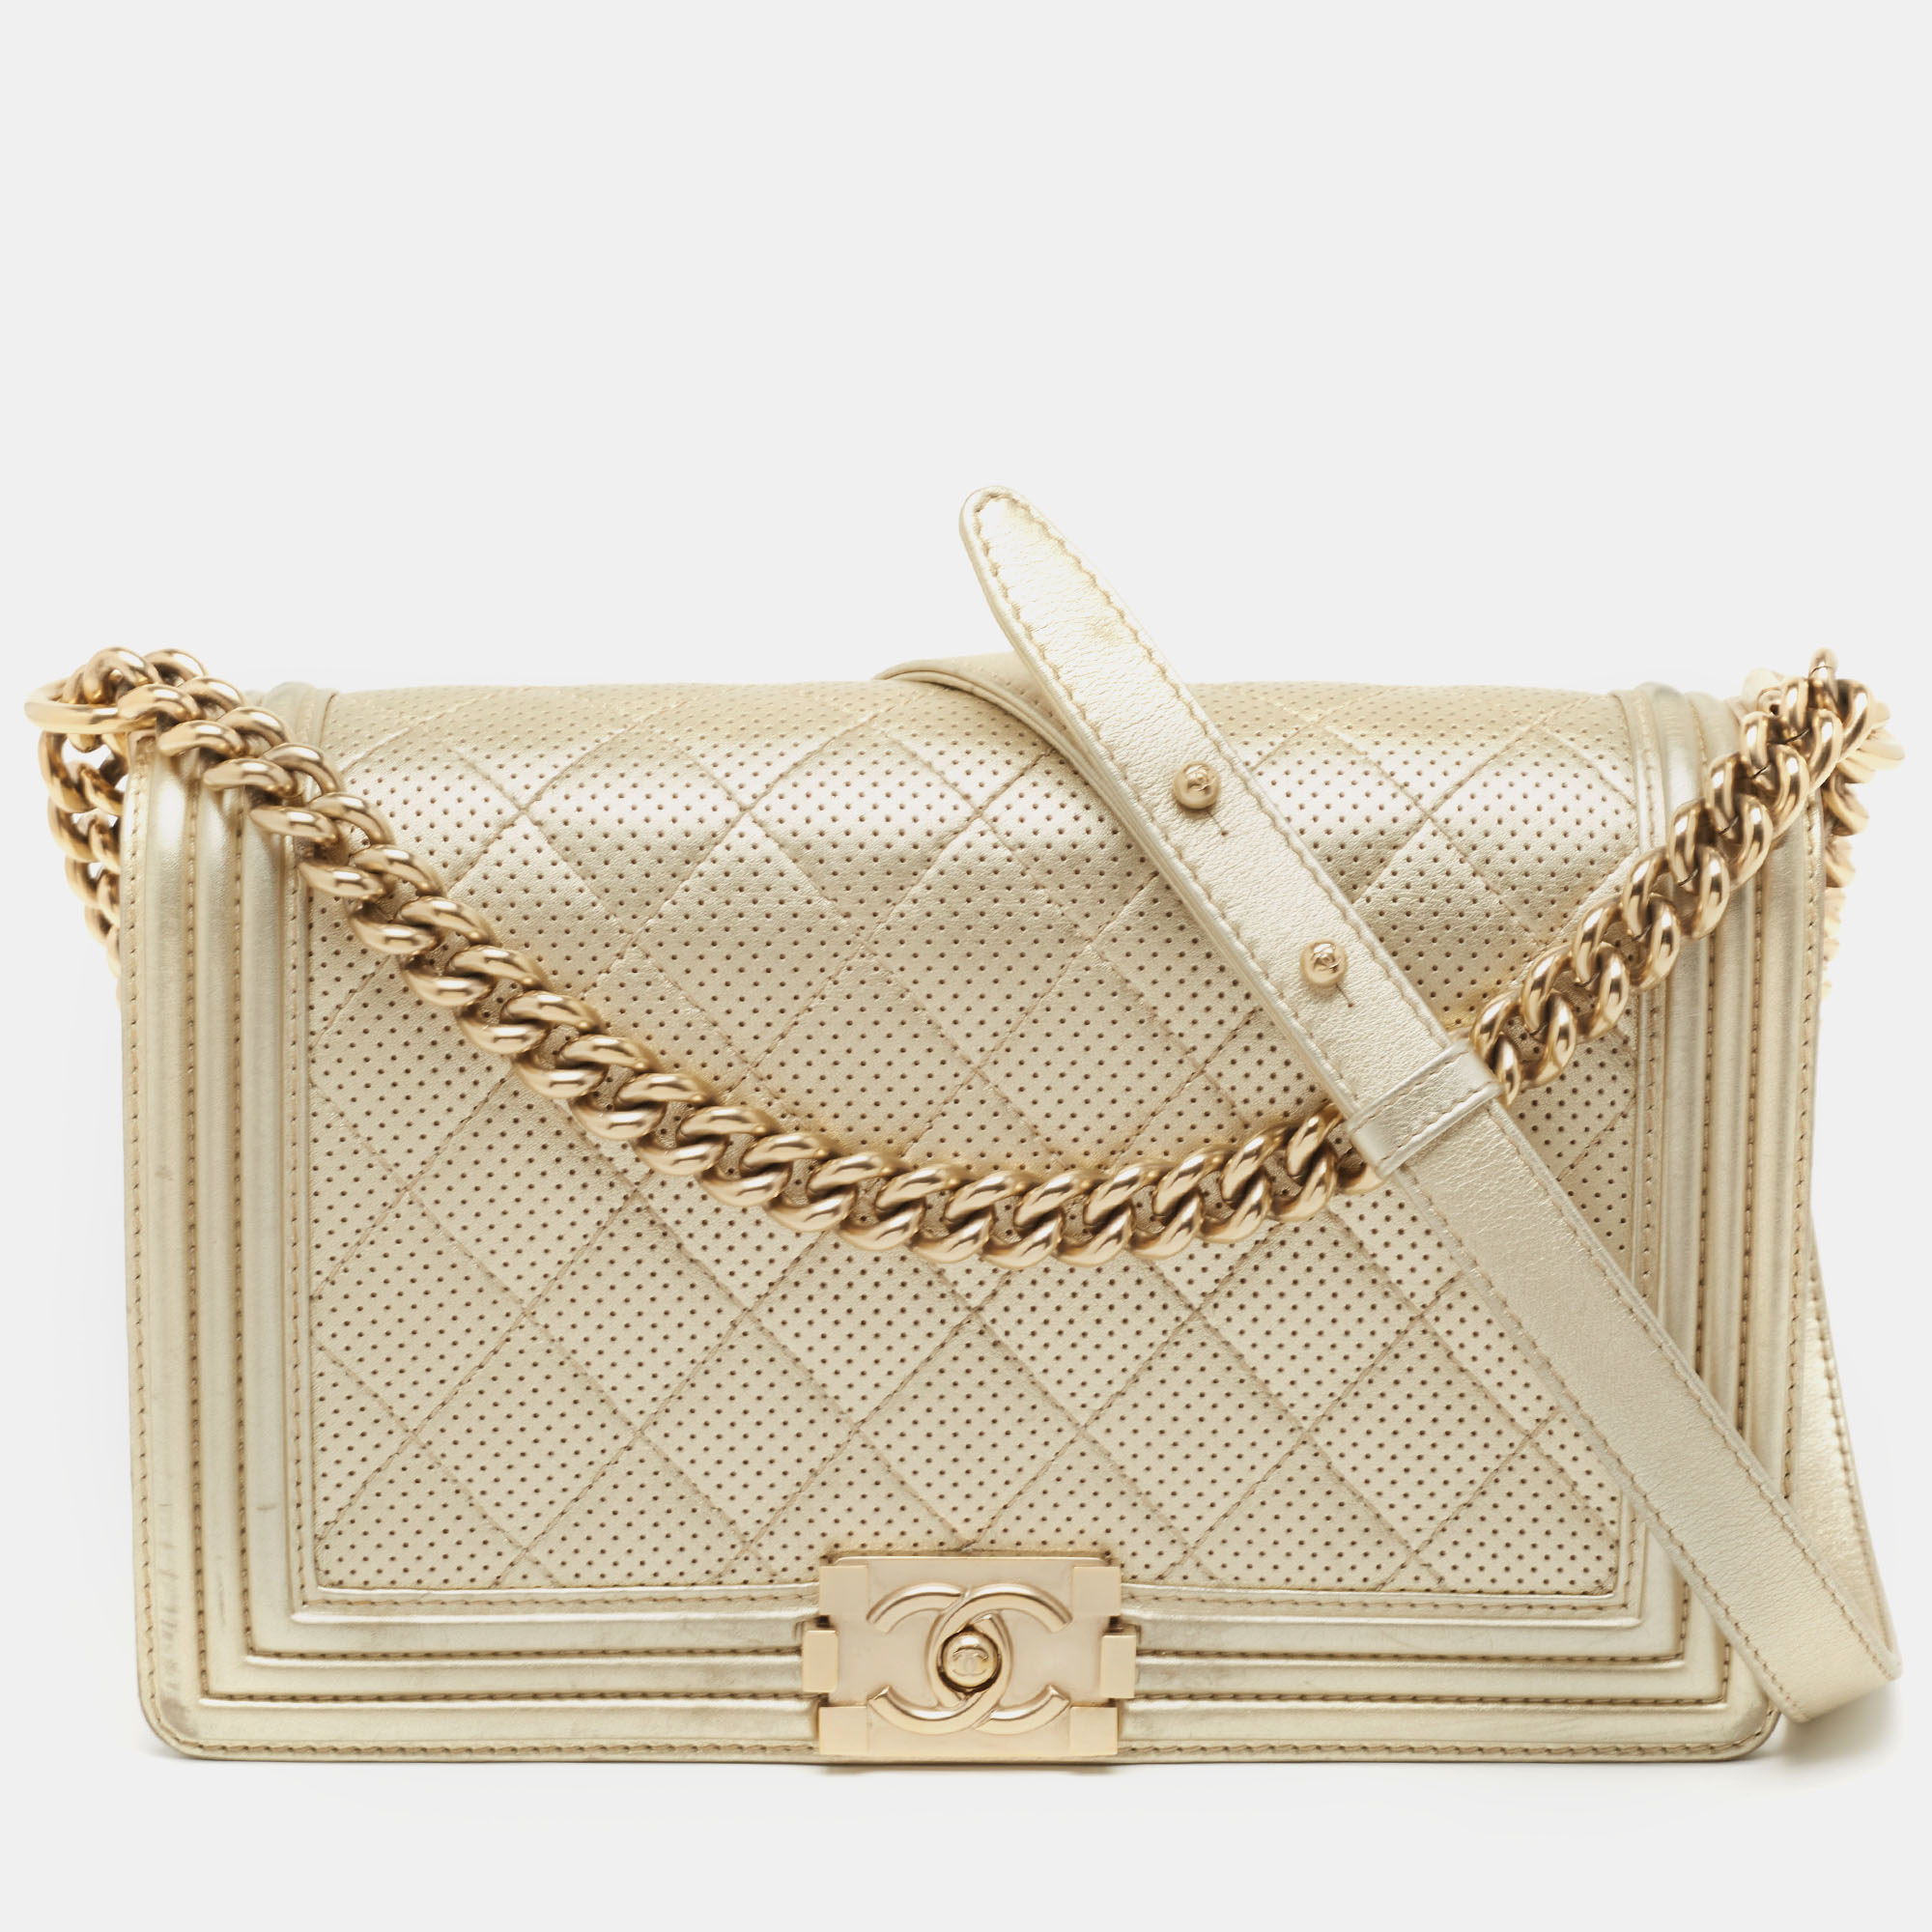 

Chanel Light Gold Perforated Leather New Medium Boy Flap Bag